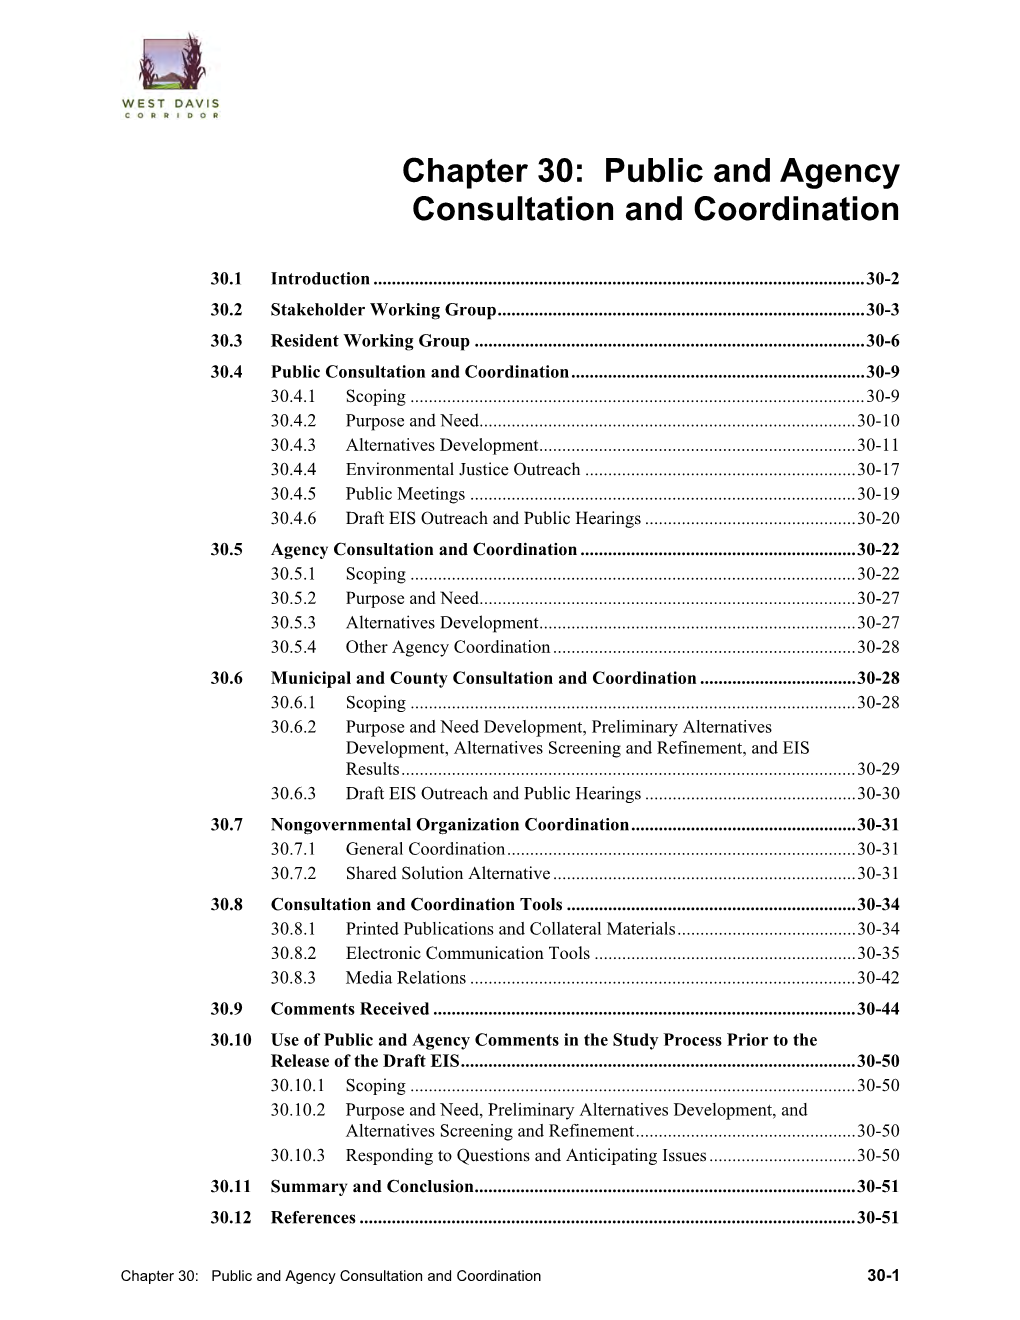 Public and Agency Consultation and Coordination